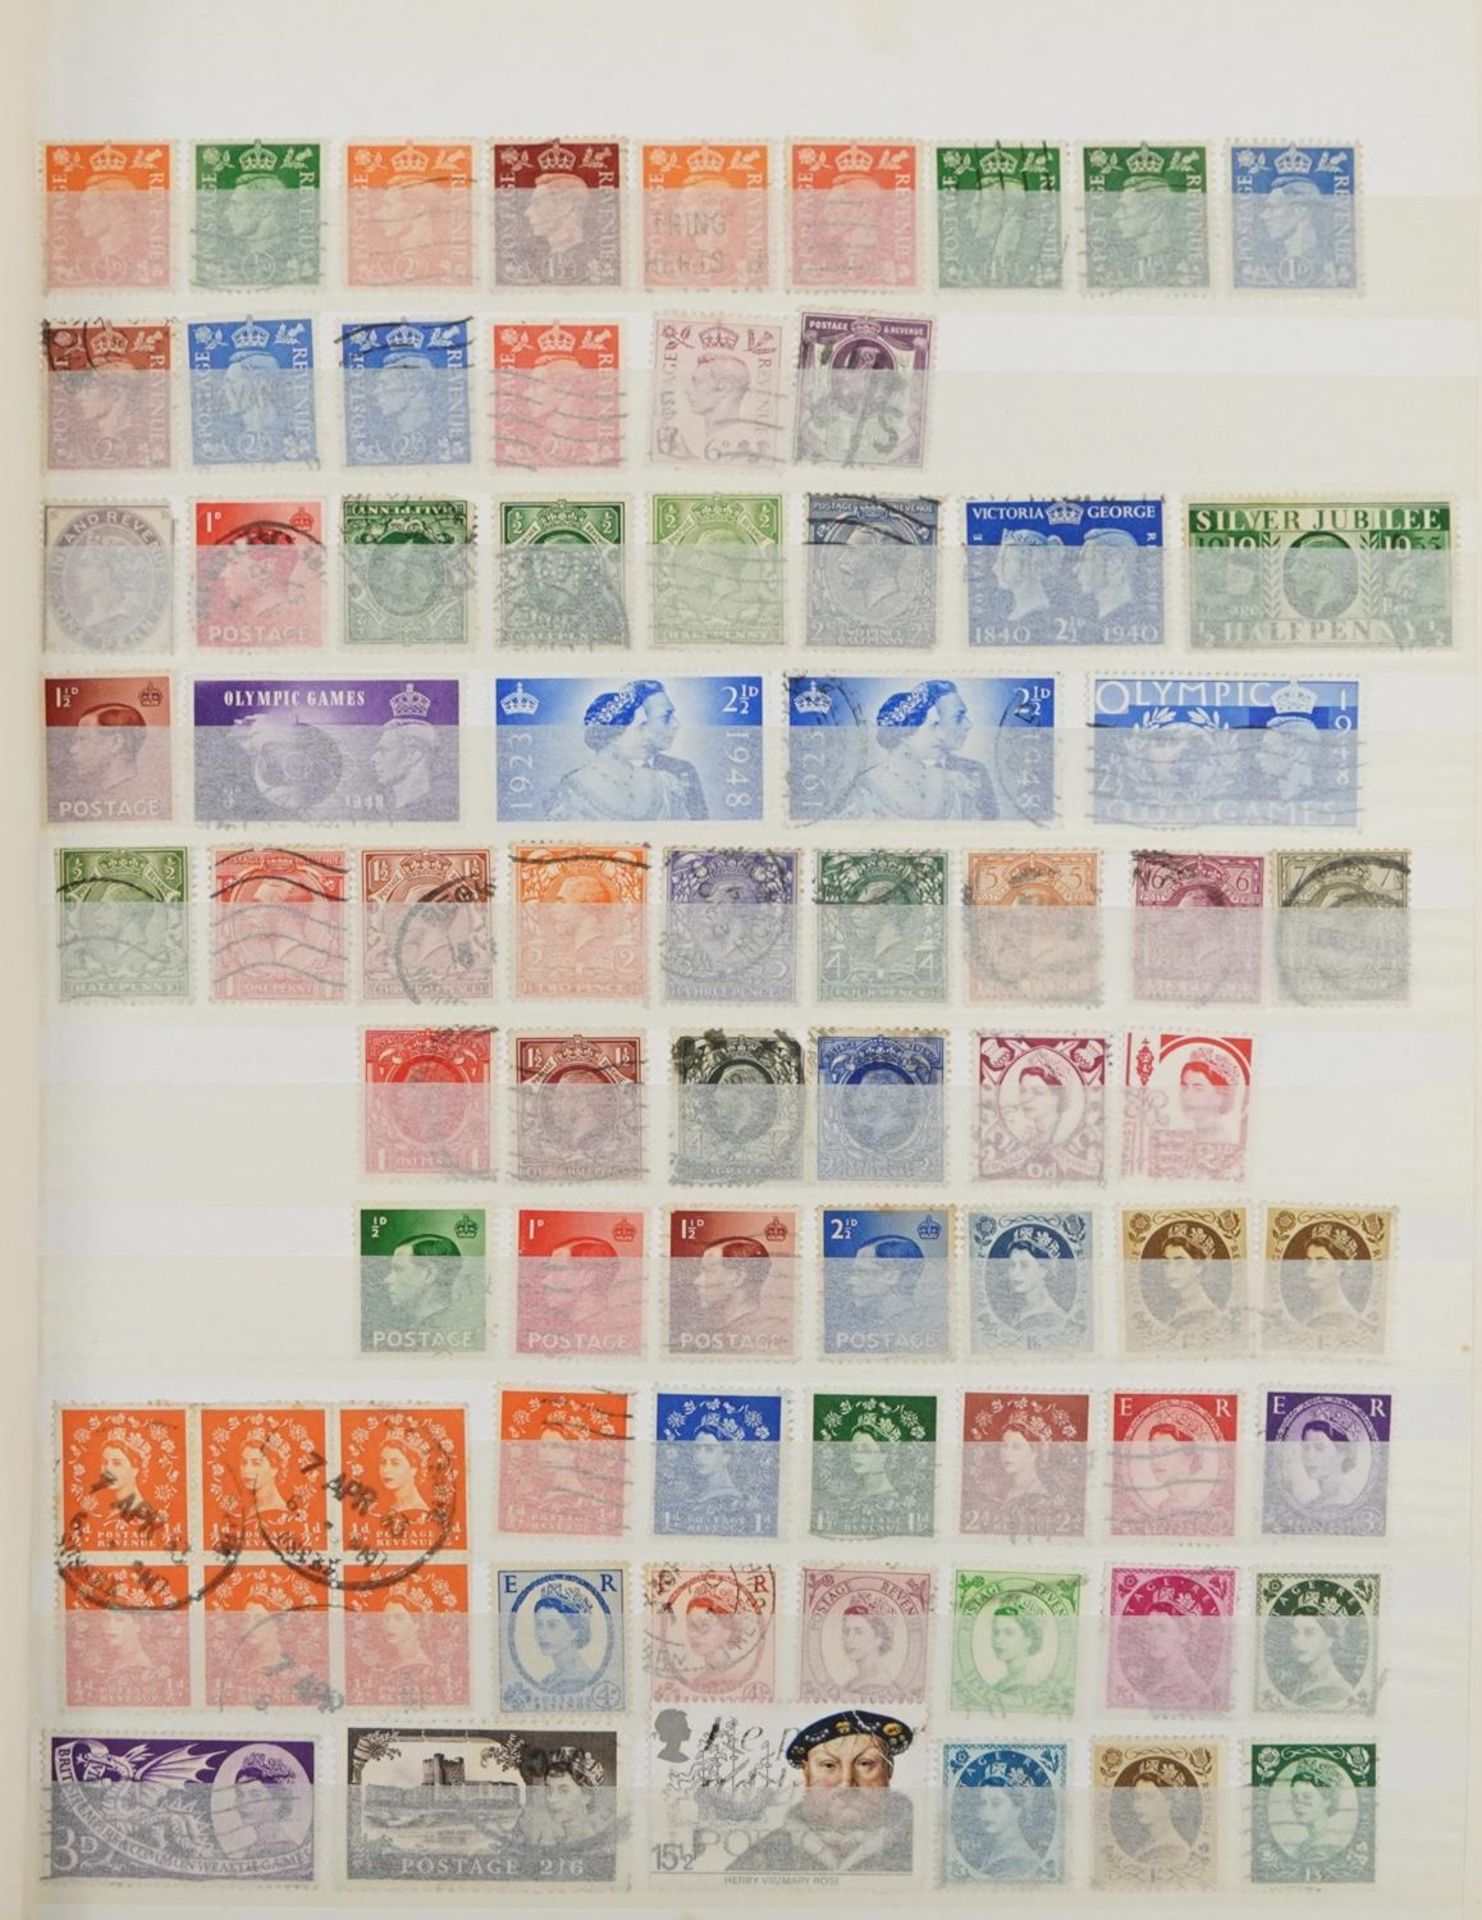 World stamps arranged in thirteen albums including Great Britain, South Africa, USA, Canada, Isle of - Image 10 of 12